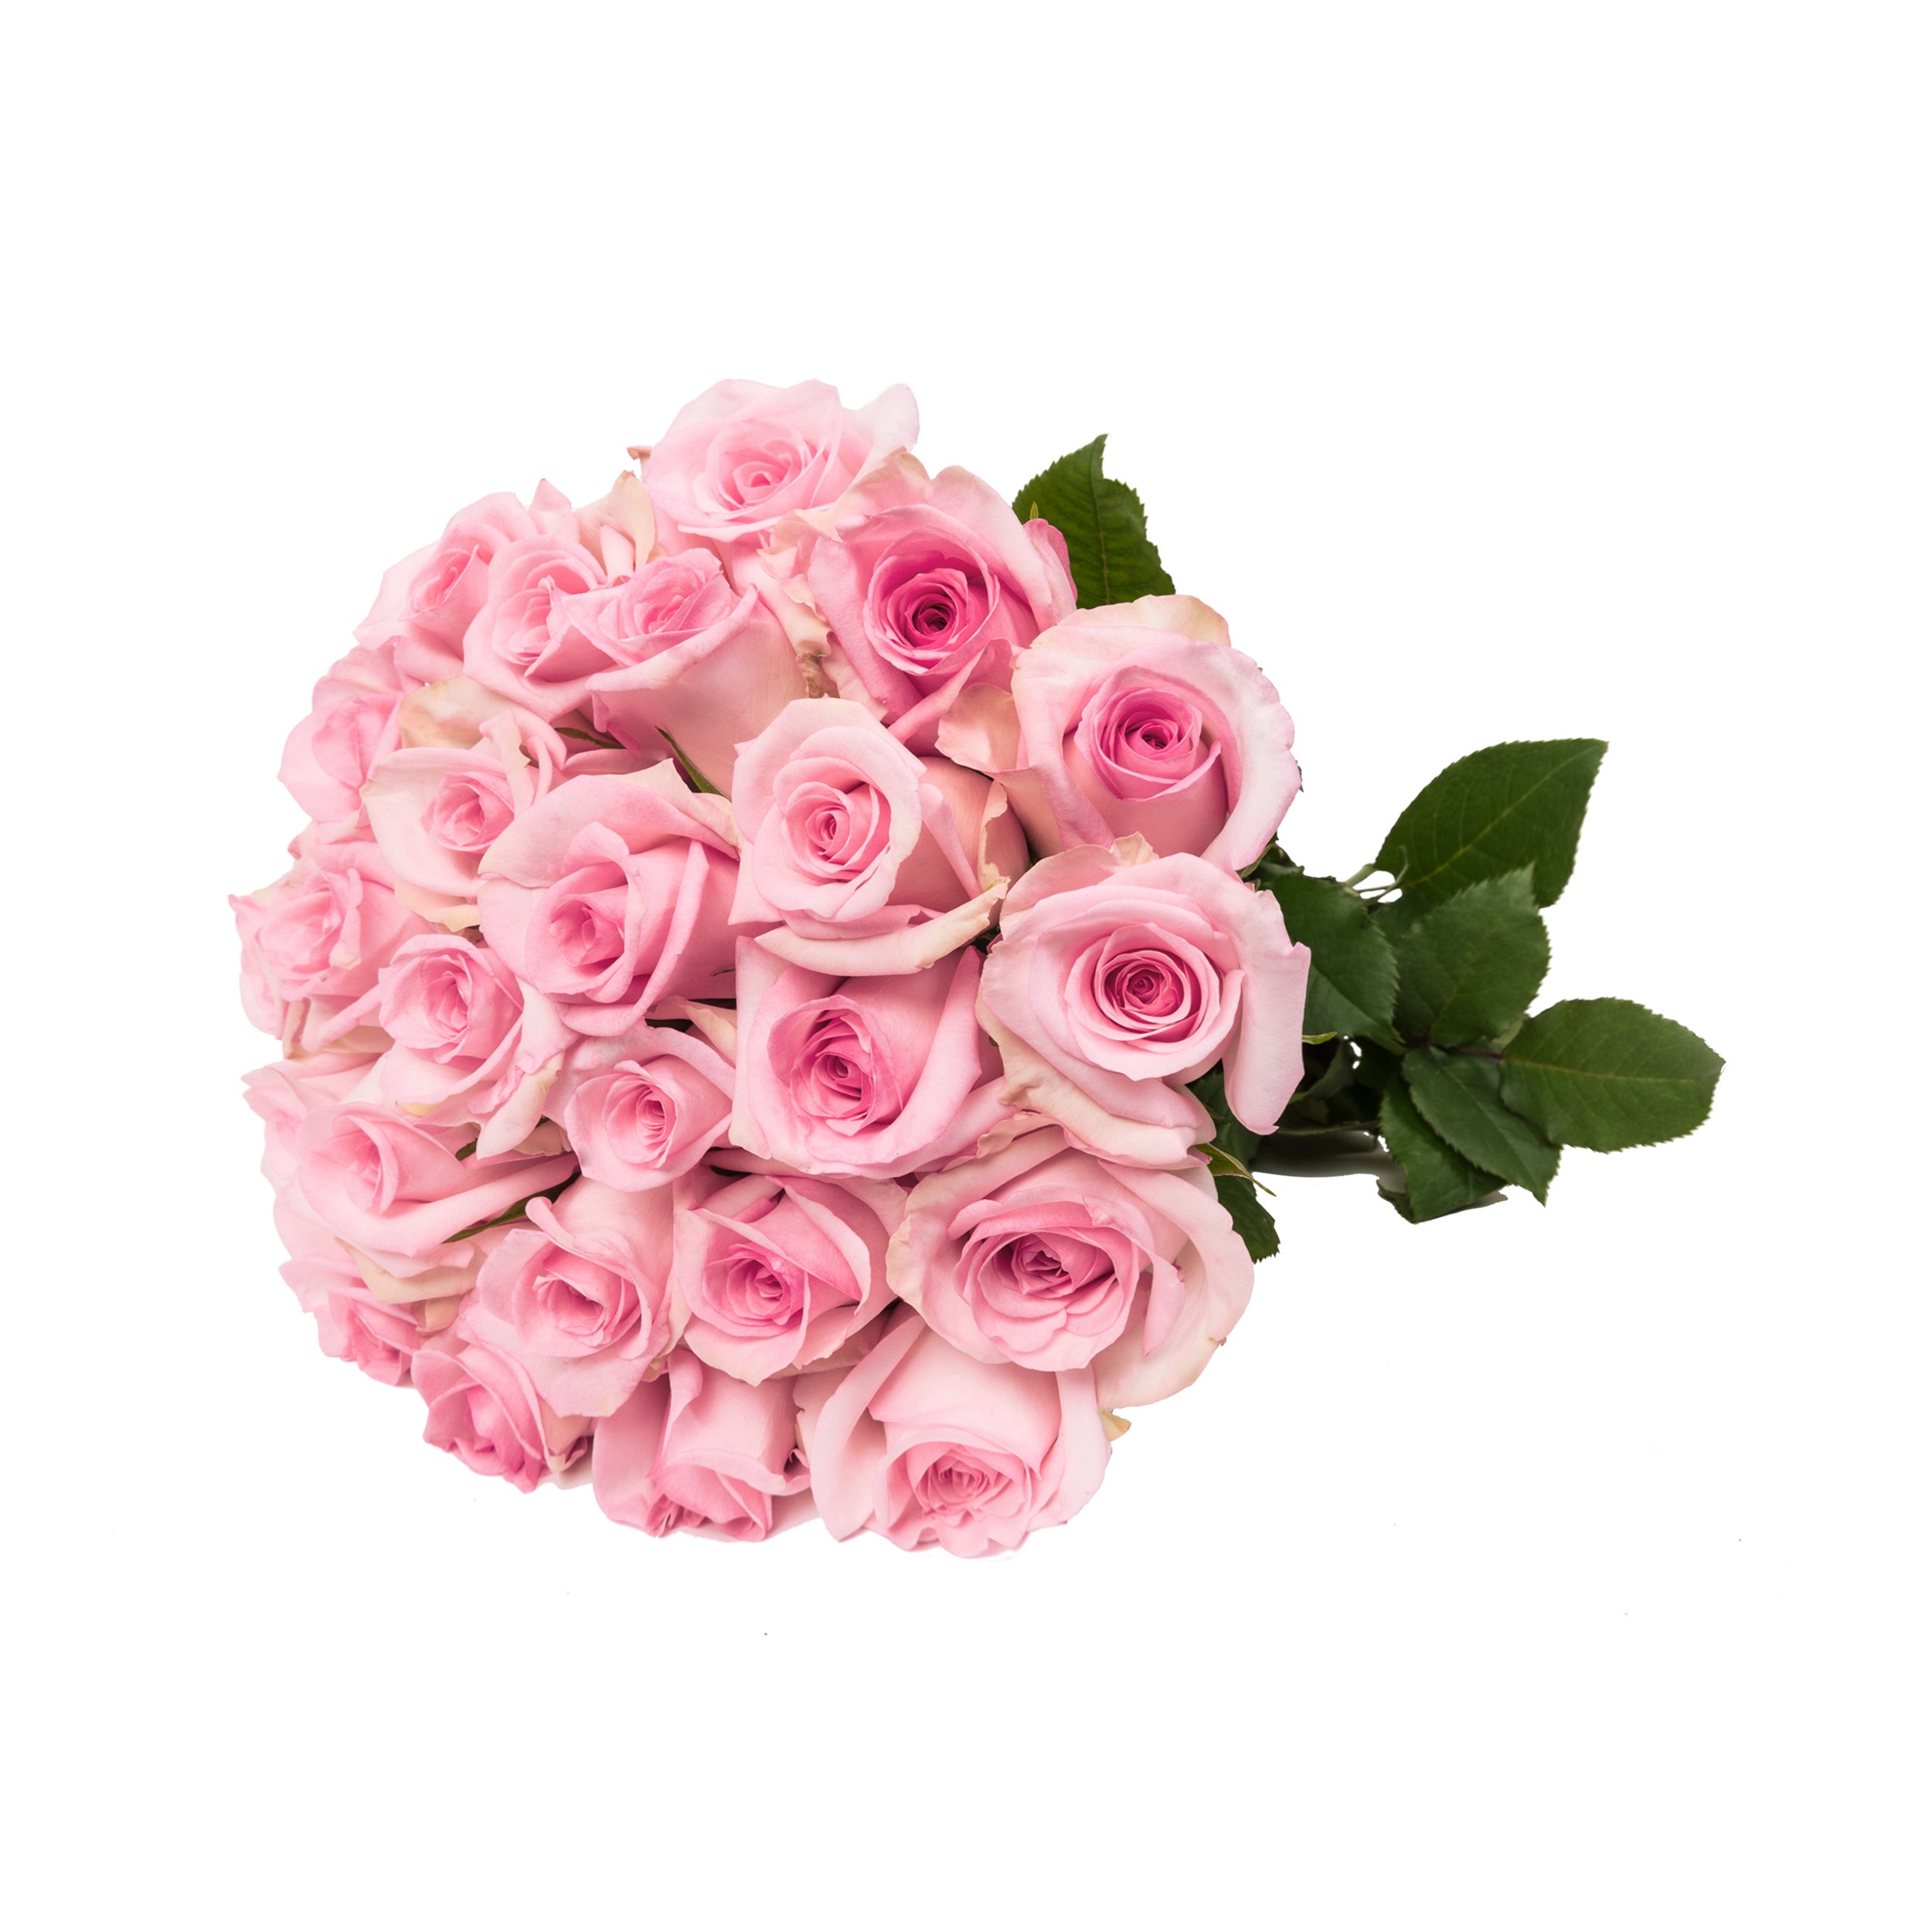 Natural Light Pink Roses - Choose from 25 to 200 Stems